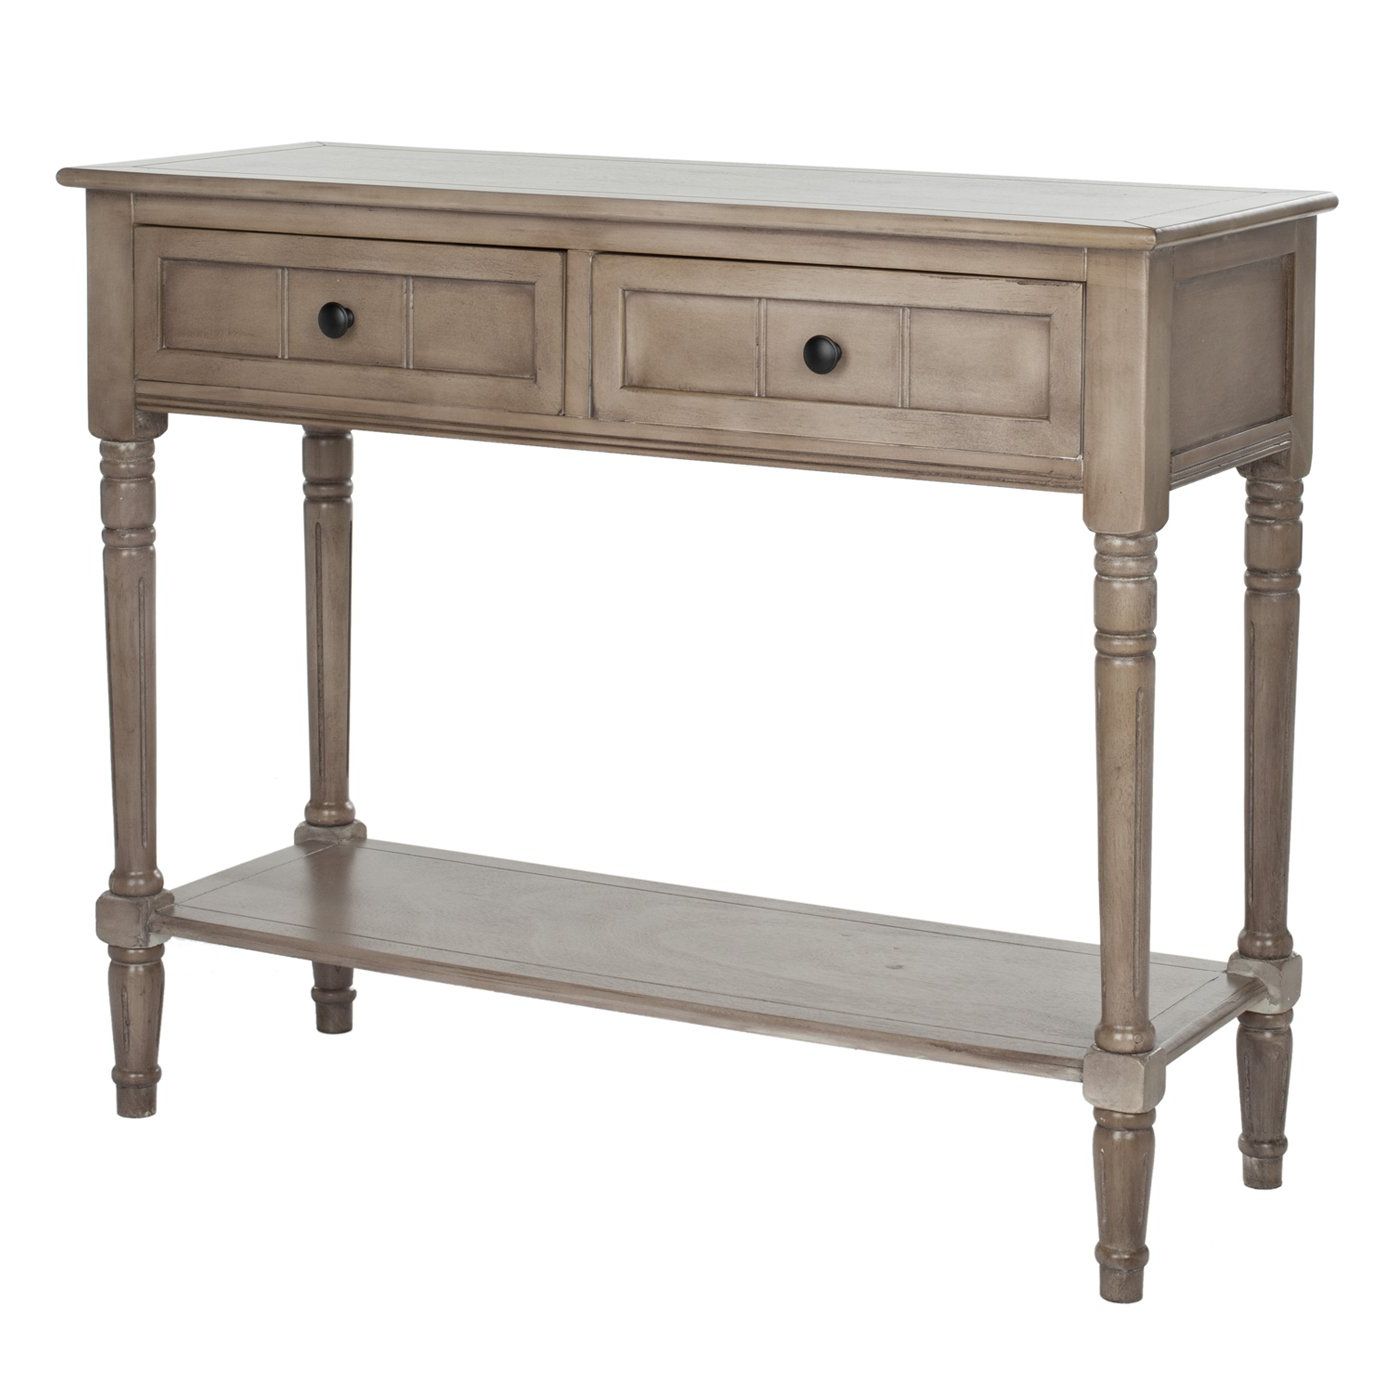 Entrance, Hallway And Console Tables | Lowe's Canada In Echelon Console Tables (View 12 of 20)